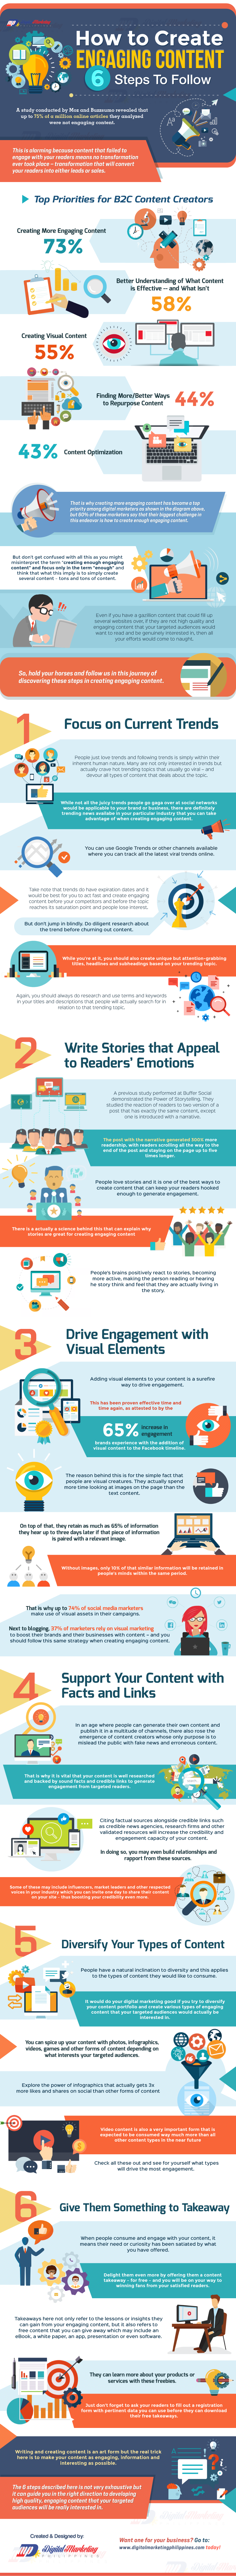 content marketing Infographic